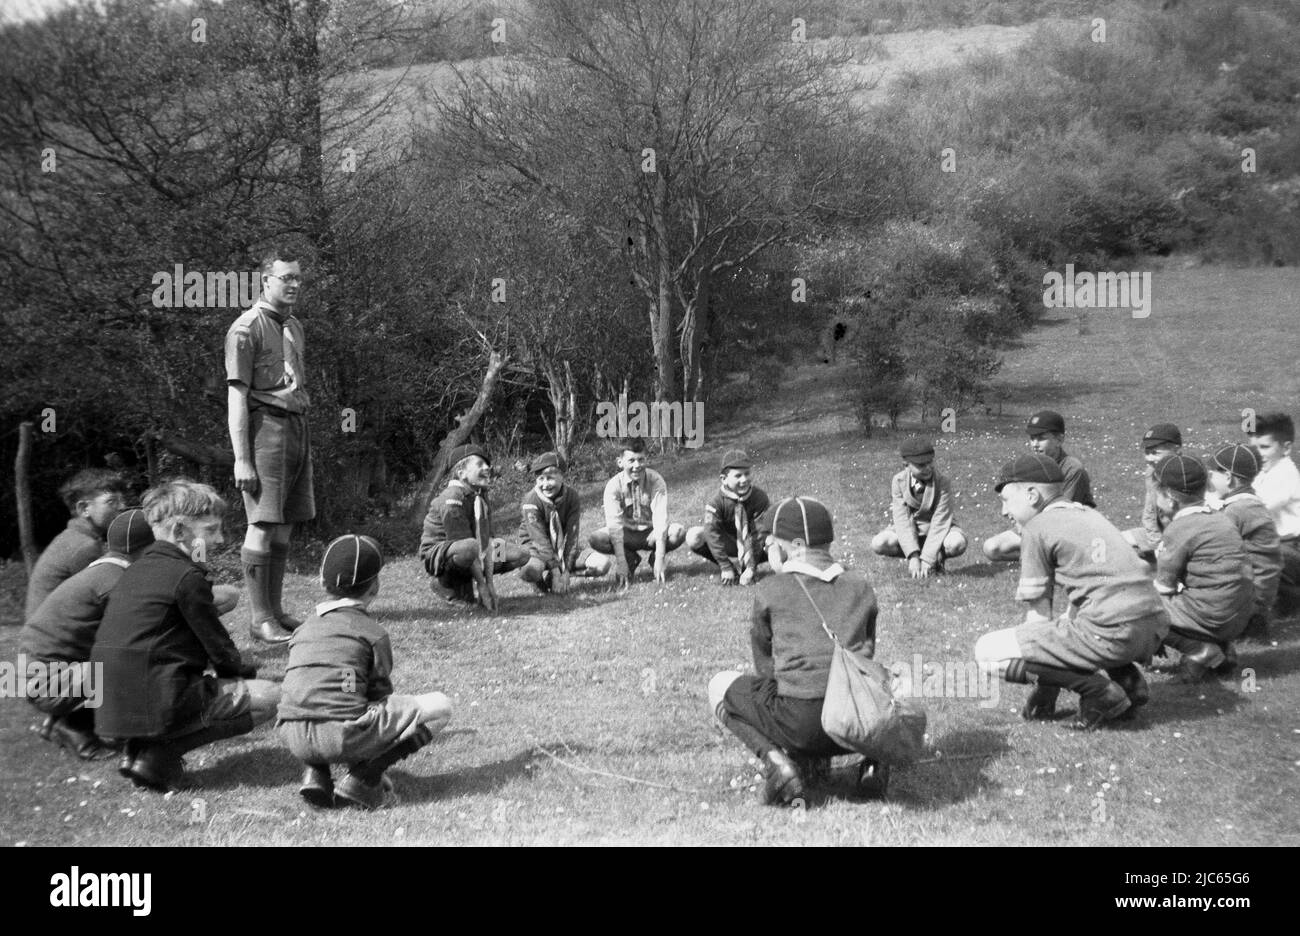 1939, a scout master with cub scouts, the 17th Coulsdon, doing the scouting ceremony of the Grand Howl at Devils Den Woods, Dorking, Surrey, England, UK. In this era, young boy or cub scouts  (8-10 year-olds) were known as Wolf Cubs. Devised by Robert Baden-Powell, the founder of the Scouting movement, the Grand Howl was based on The Jungle Book', a novel by Rudyard Kipling, where describes a wolf pack meeting, which begins with everyone circling their leader and howling. In scouting, this became the 'Grand Howl', with the idea being that the young scouts gather together and focus. Stock Photo